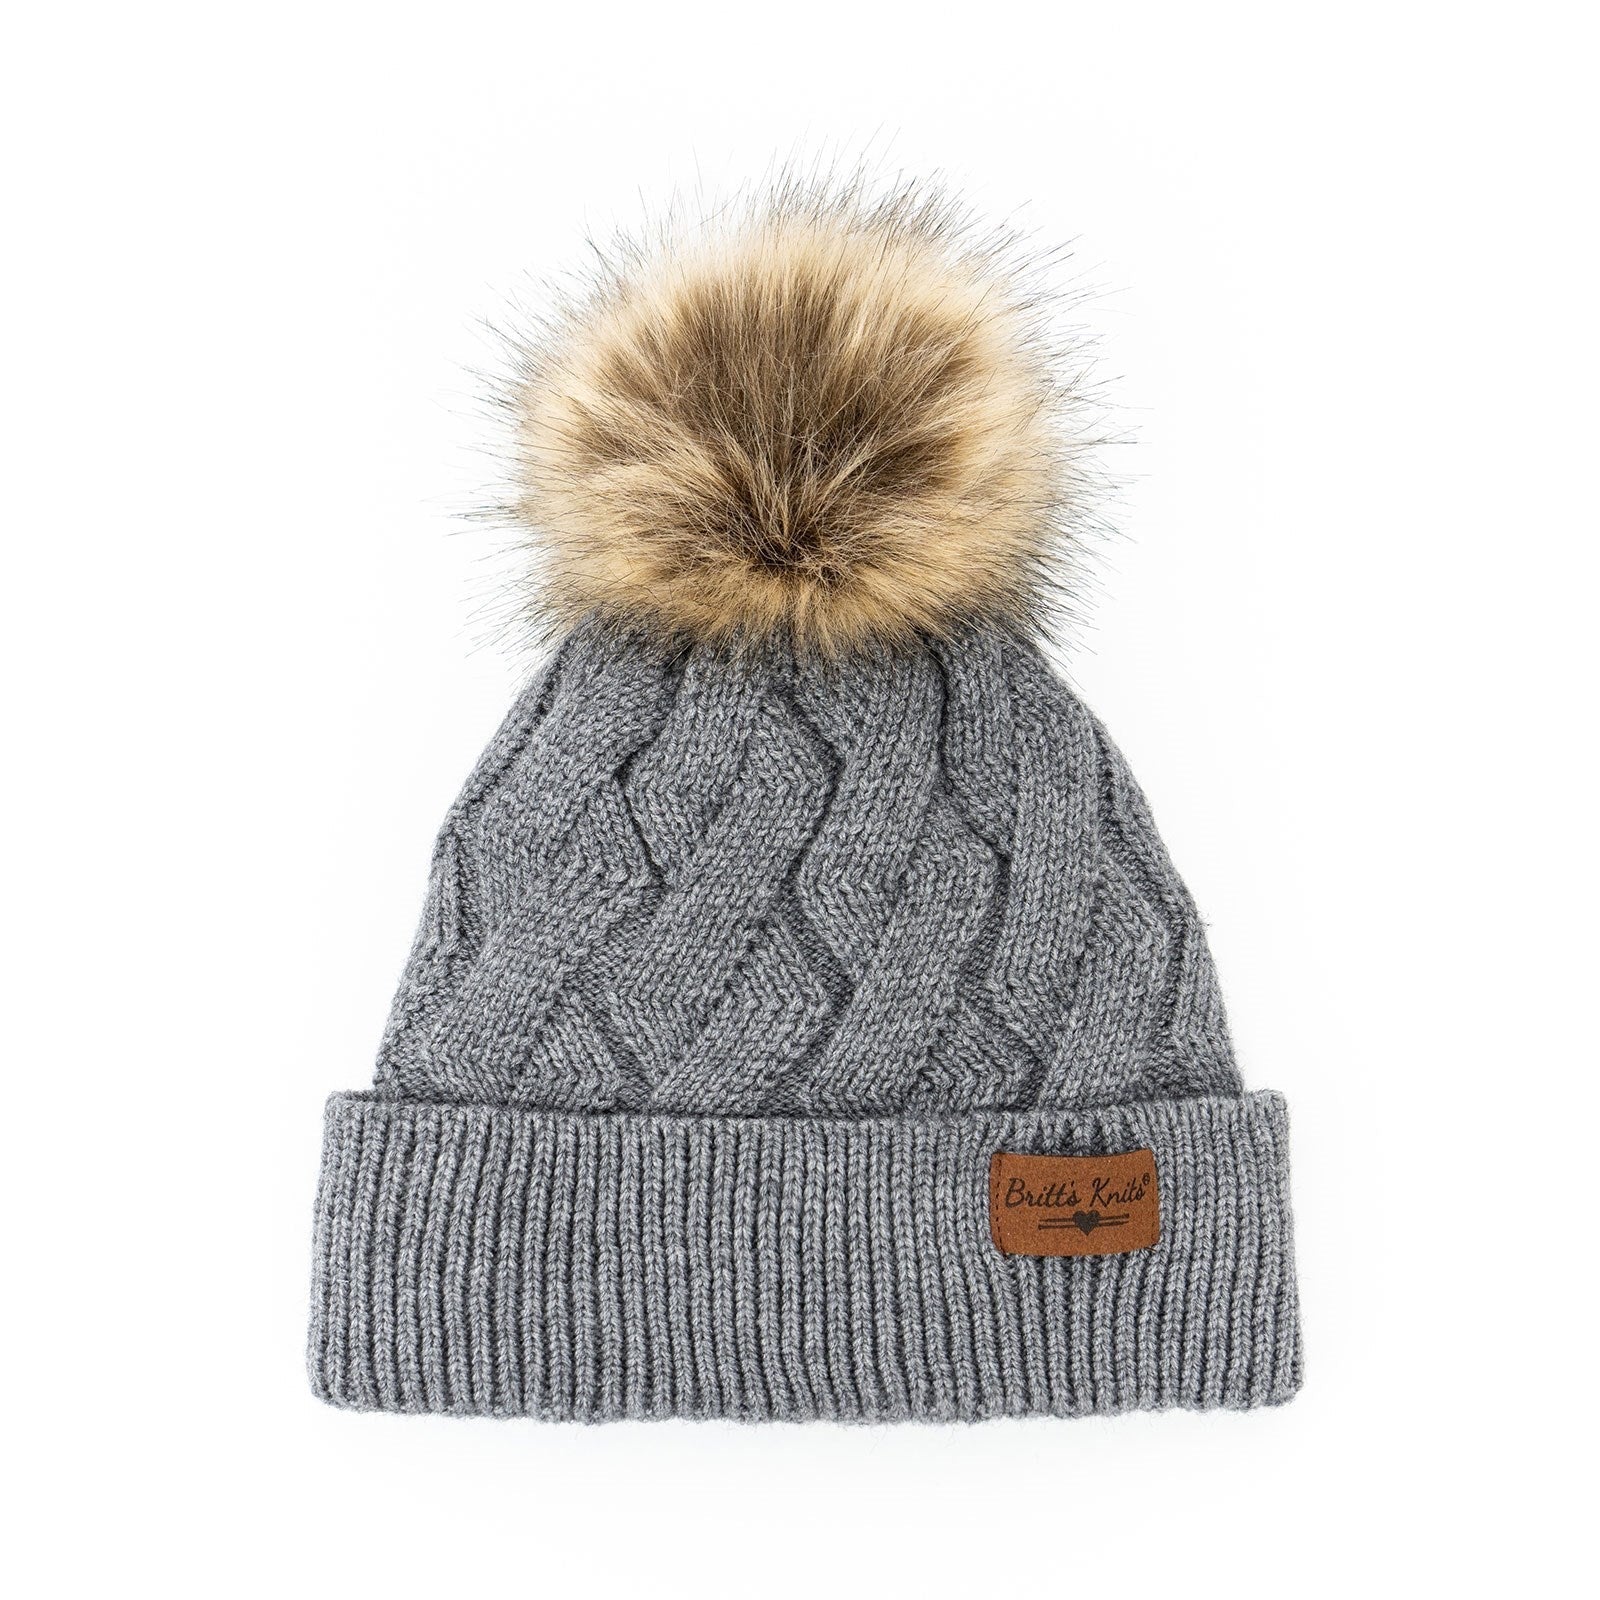 Shop Mainstays Collection Pom Hat-Winter Hat at Ruby Joy Boutique, a Women's Clothing Store in Pickerington, Ohio